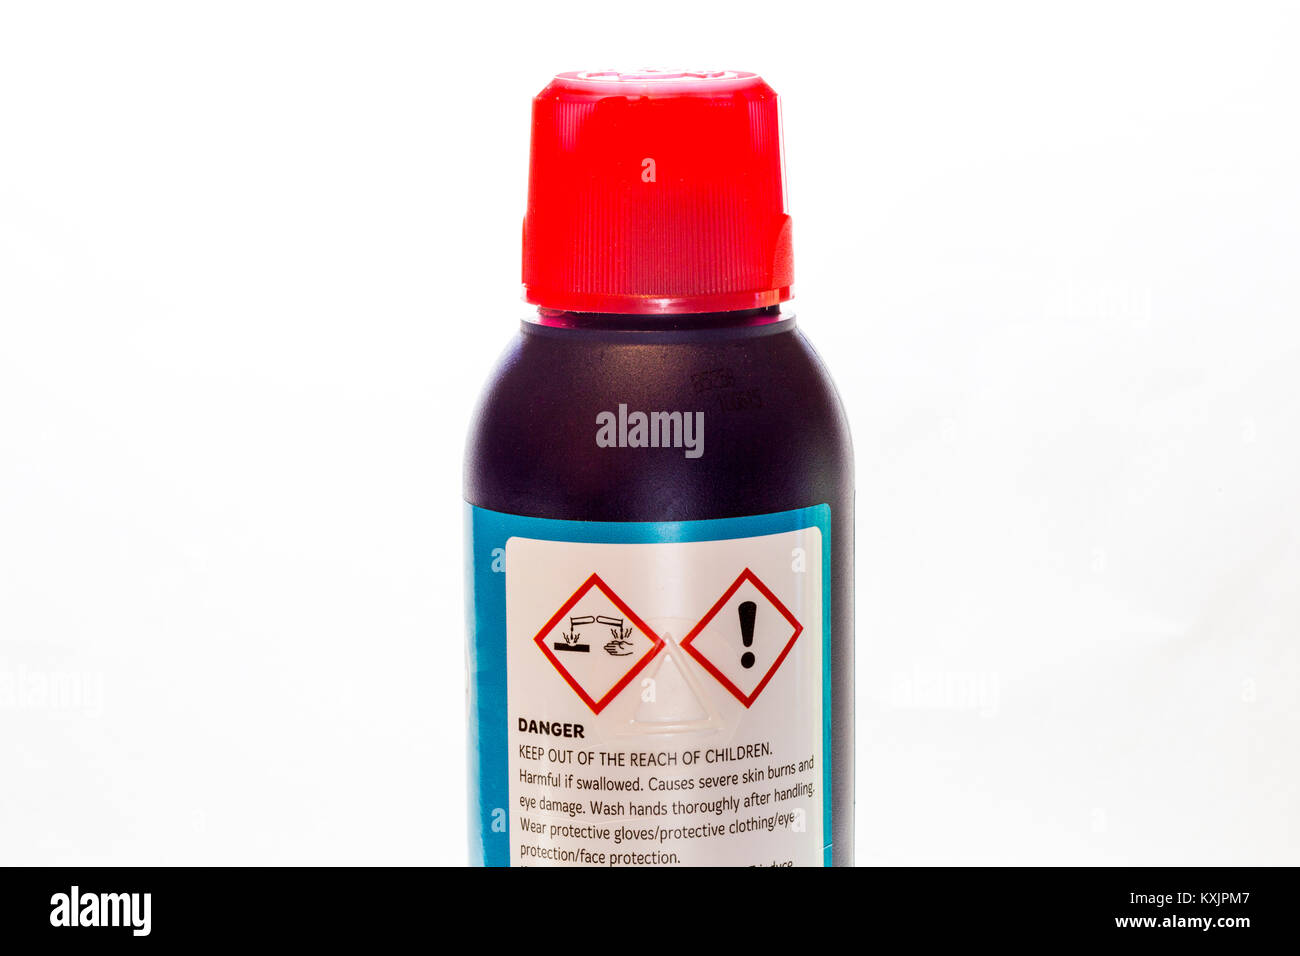 The international pictogram for corrosive chemicals. On a bottle of cleaner. Stock Photo